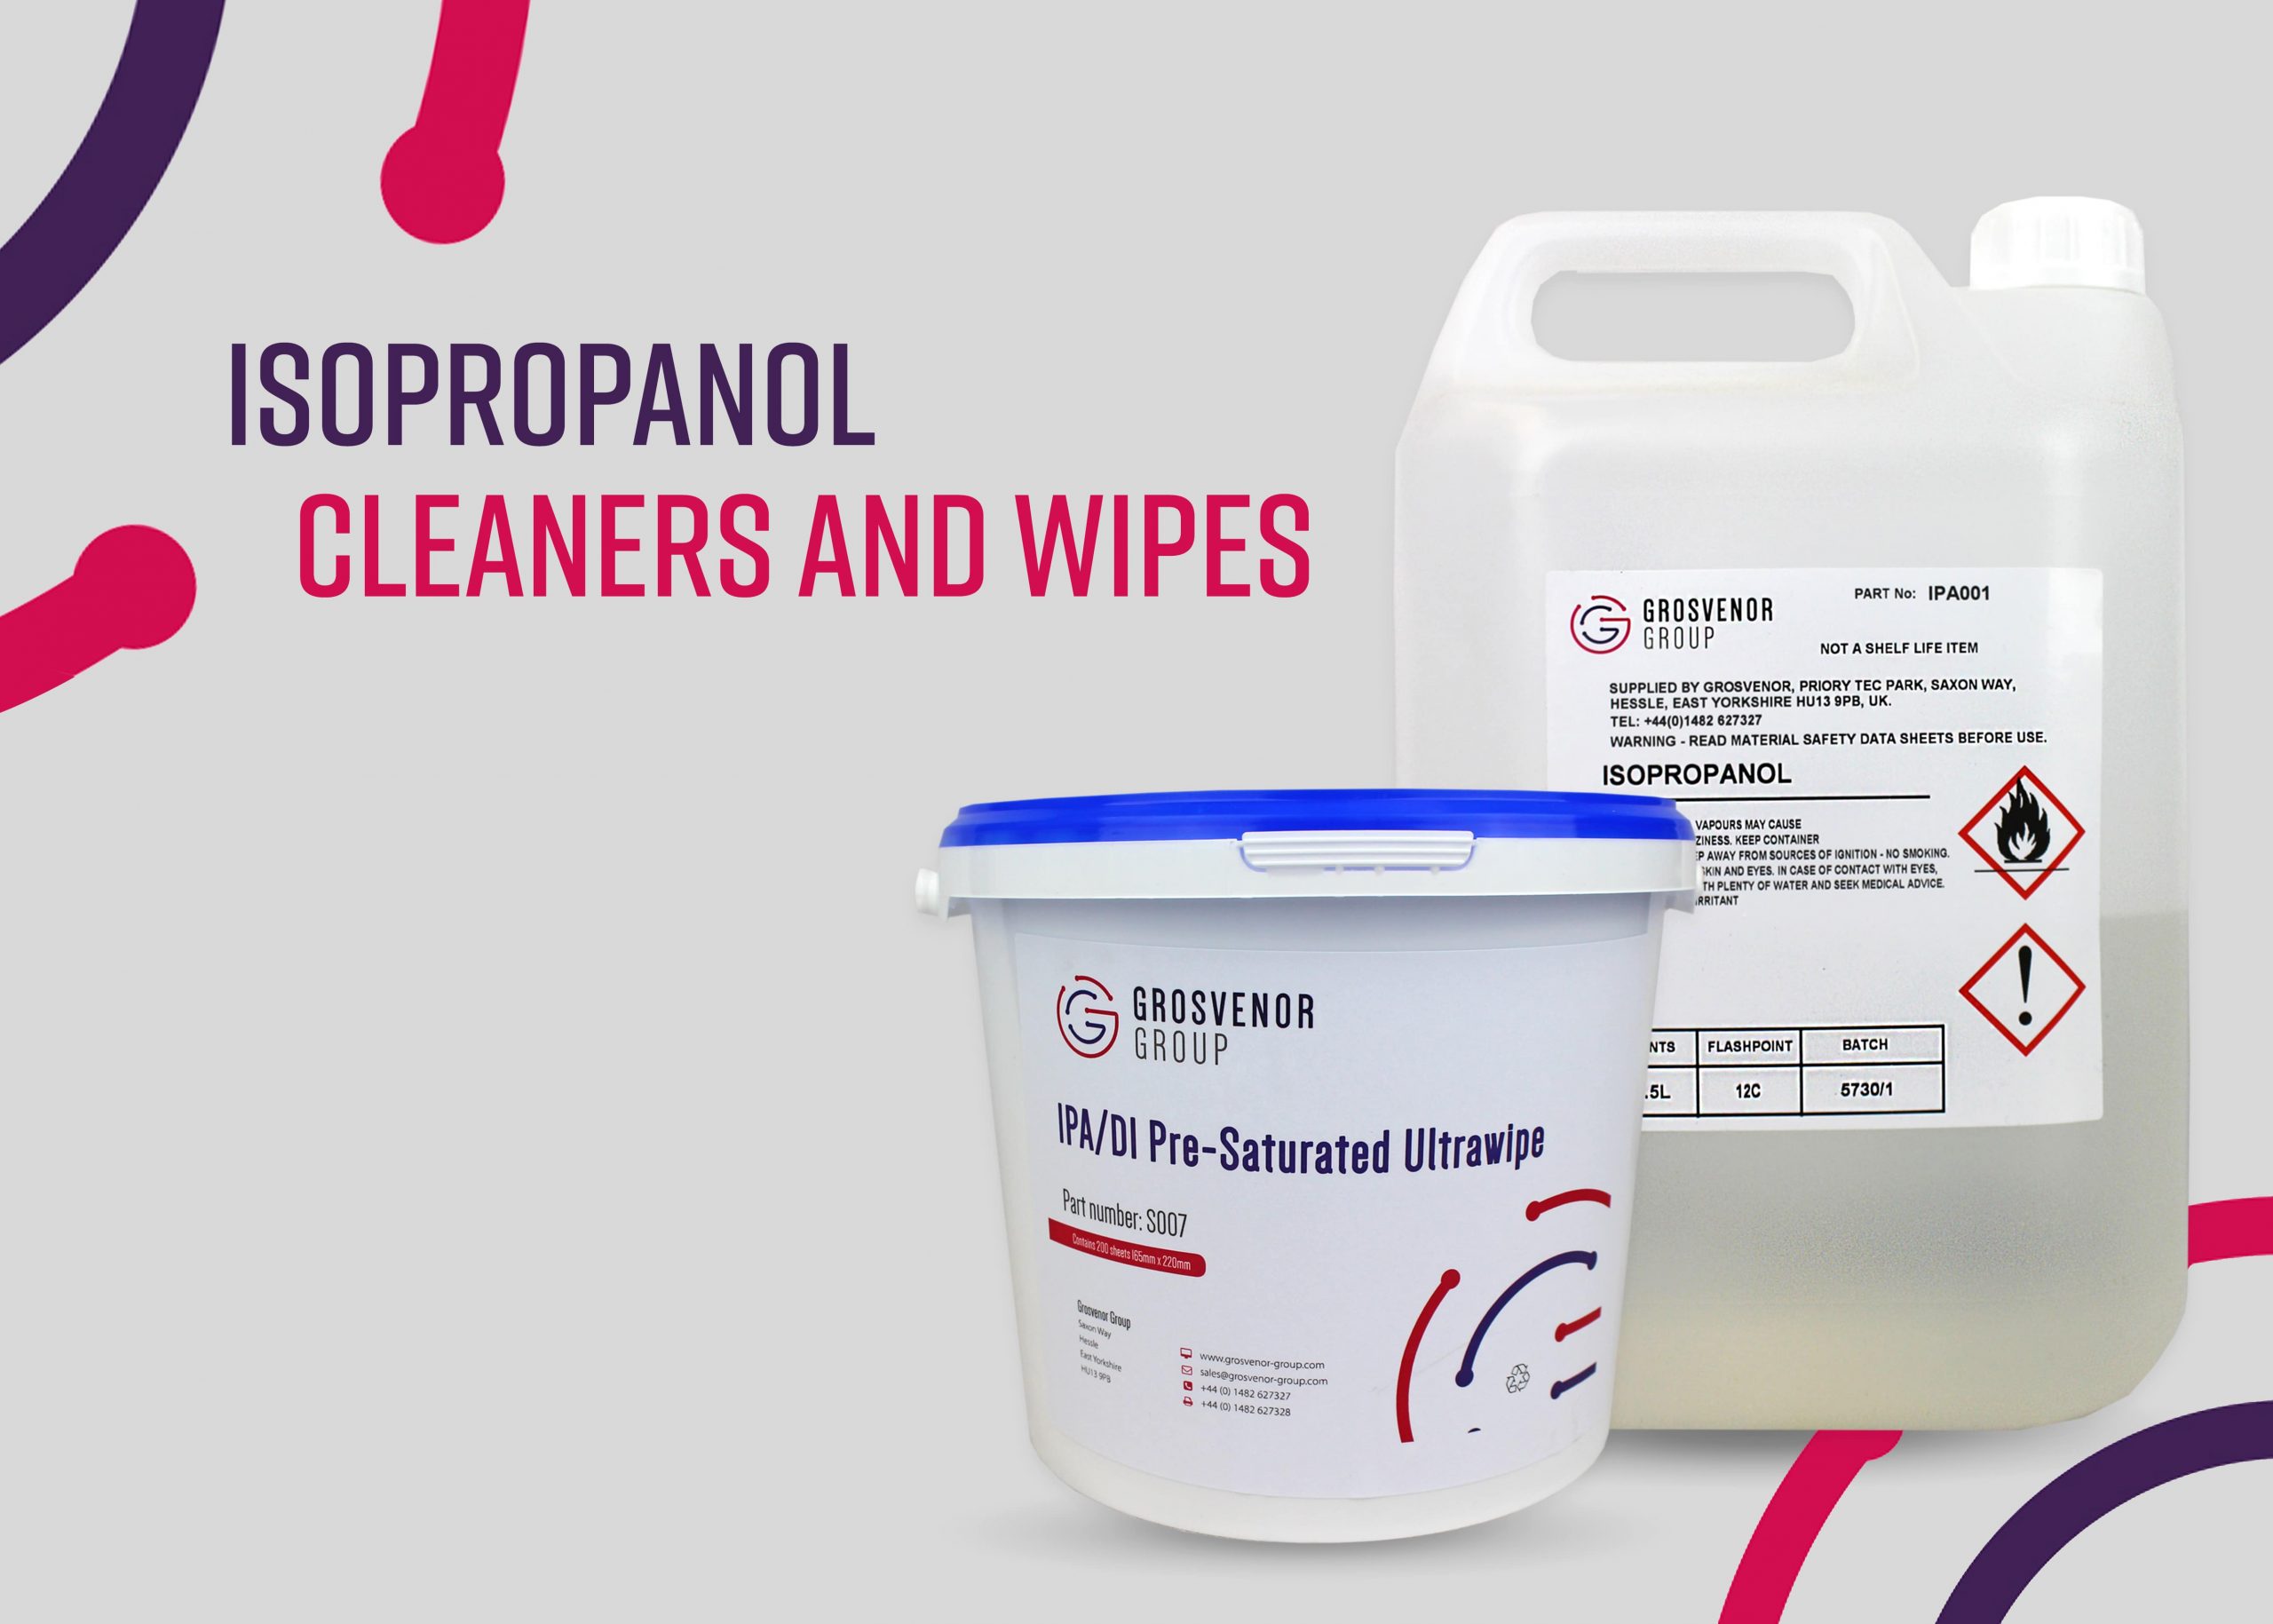 Isopropanol Cleaners and Wipes for Next Day Delivery